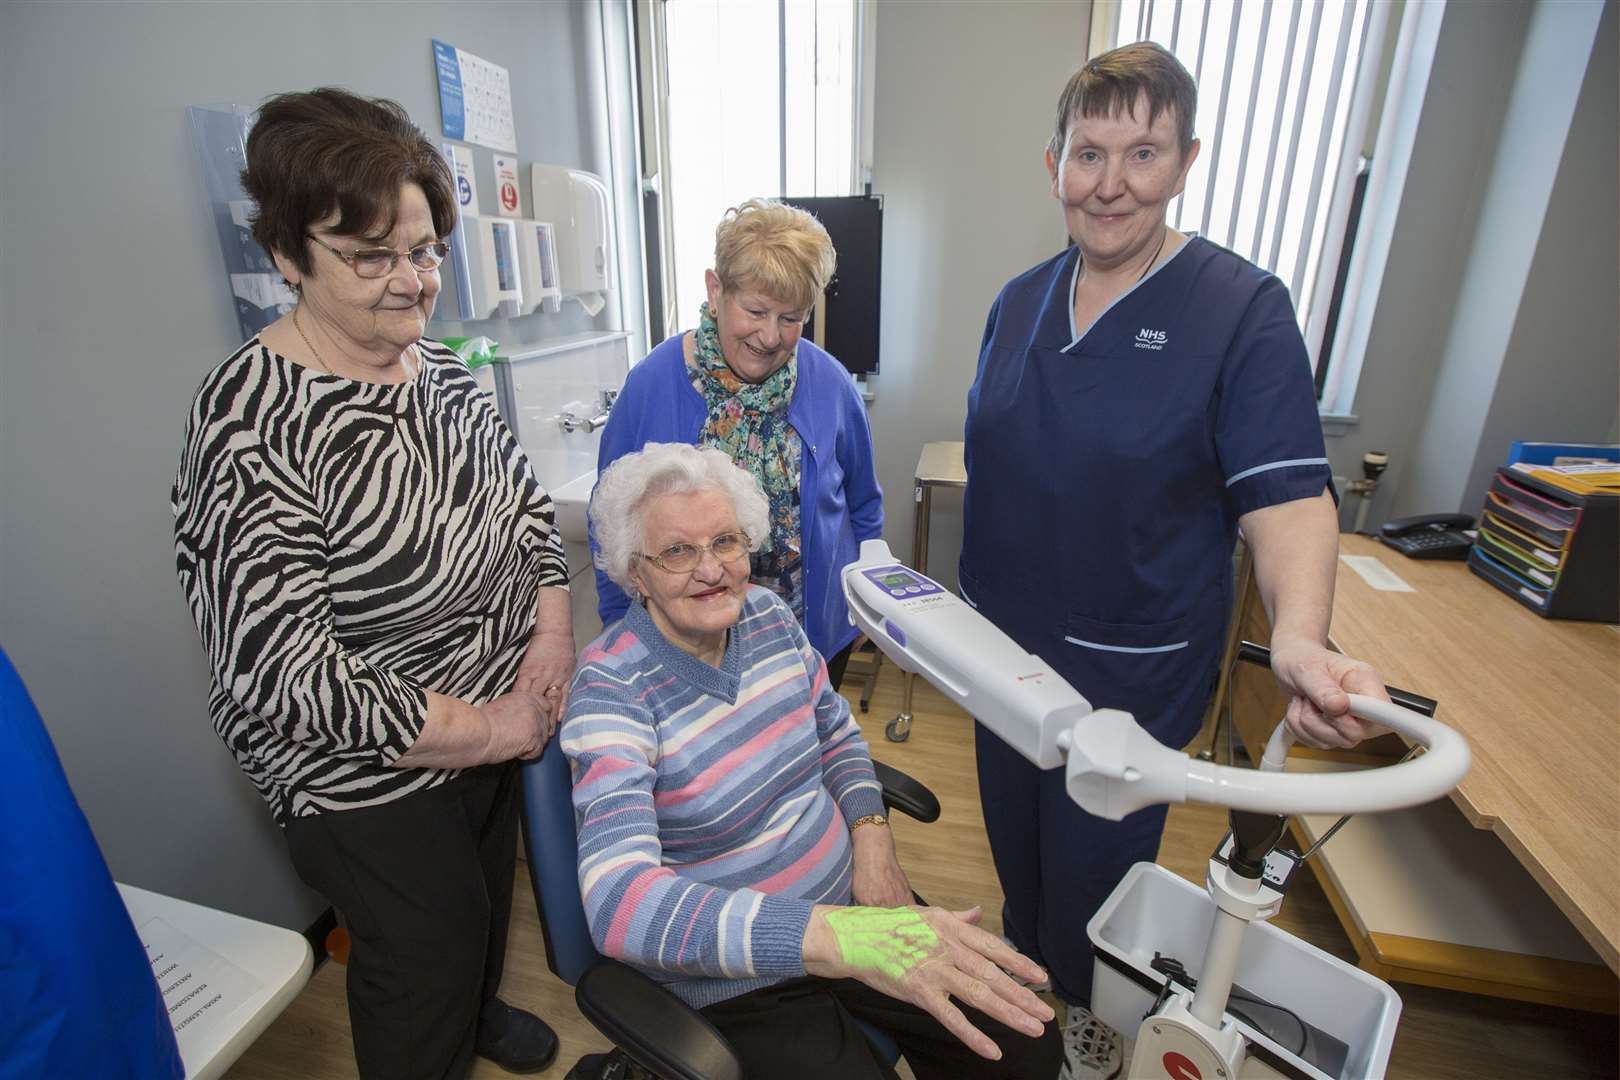 Senior charge nurse Alison Geddes demonstrating a new AccuVein machine on League of Friends secretary Lottie Shearer earlier this year, watched by chairperson Annette Sinclair (centre) and treasurer Lorette Mackay (left). Picture: Robert MacDonald / Northern Studios